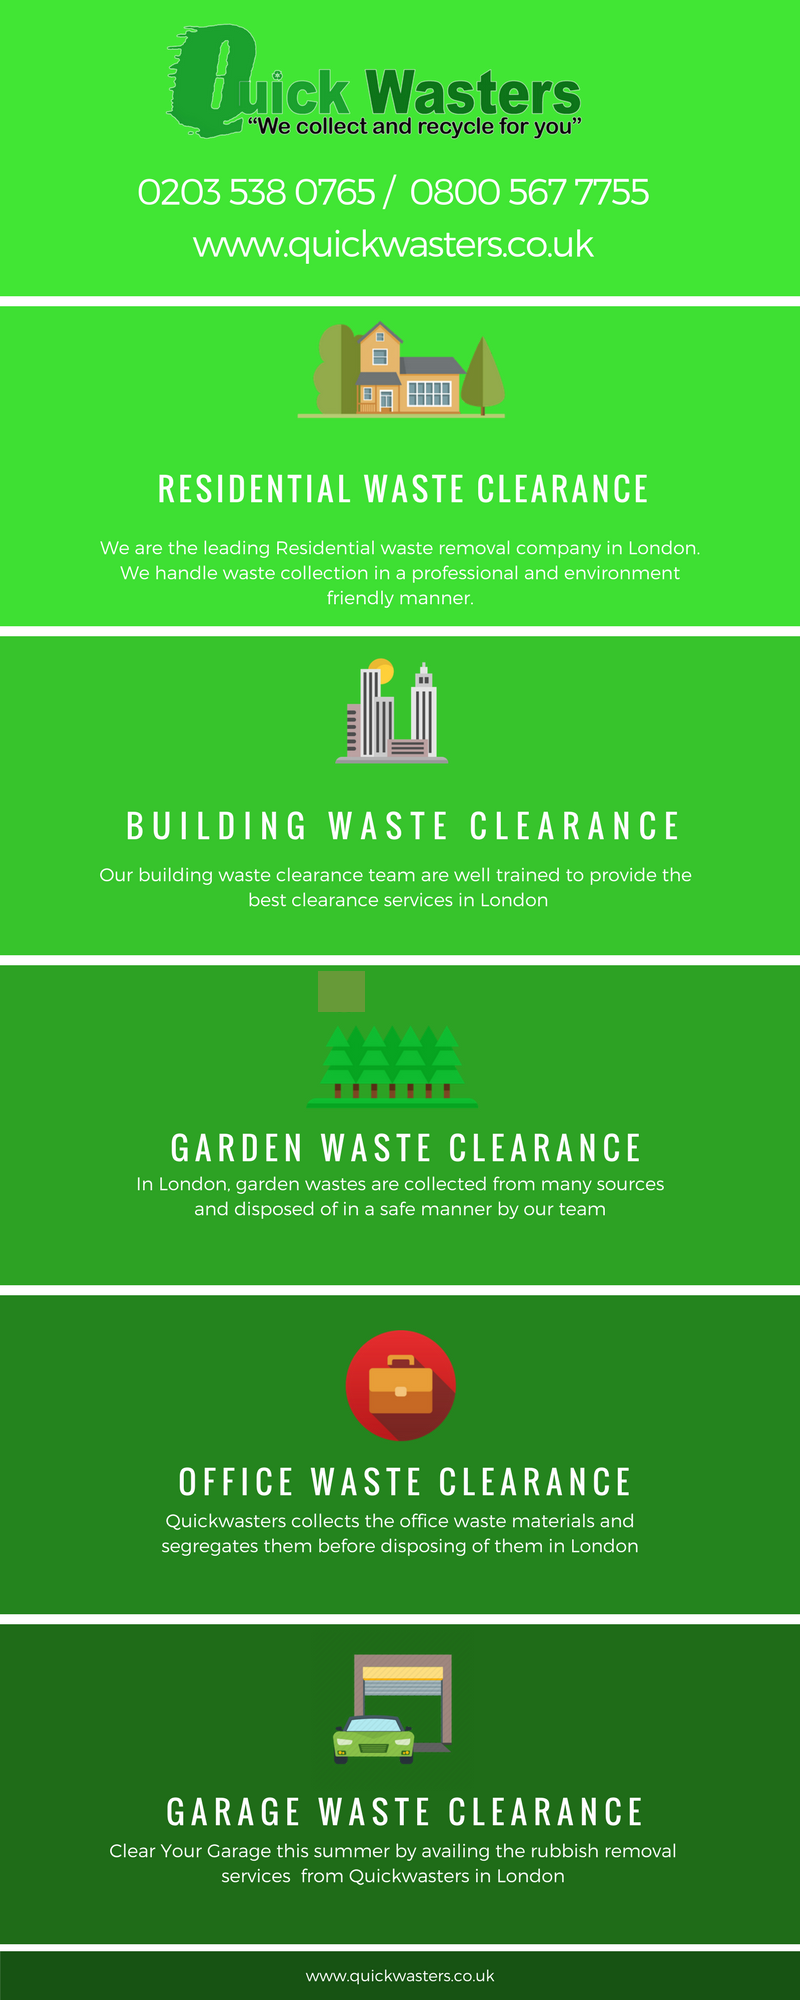 Reliable Rubbish Removal Company London - Quickwasters